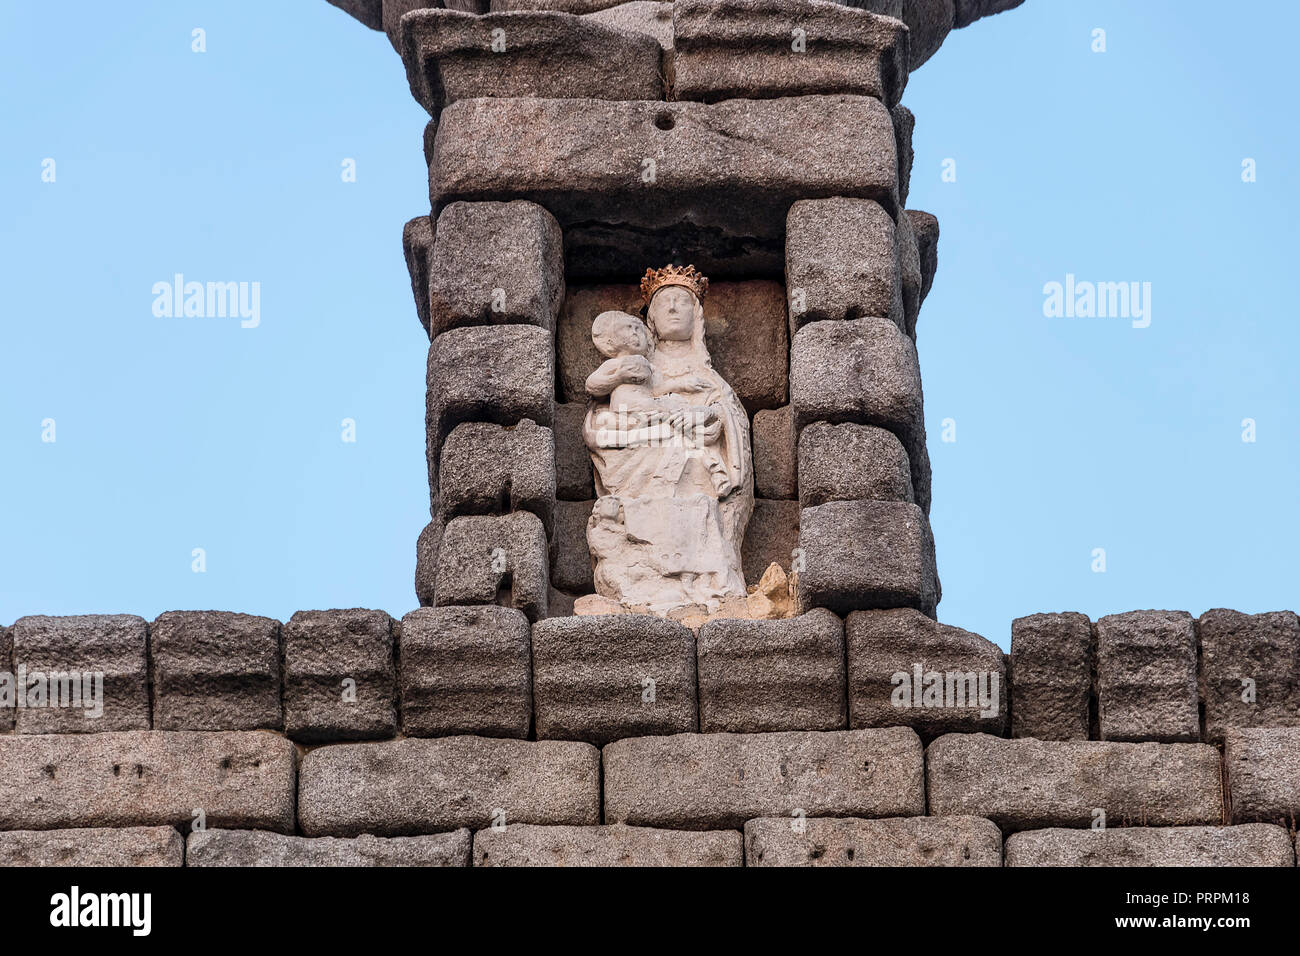 Detail of roman aqueduct, Virgin of the Aqueduct, located in the central niche of the monument has since the Plaza del Azoguejo, Segovia, Spain Stock Photo